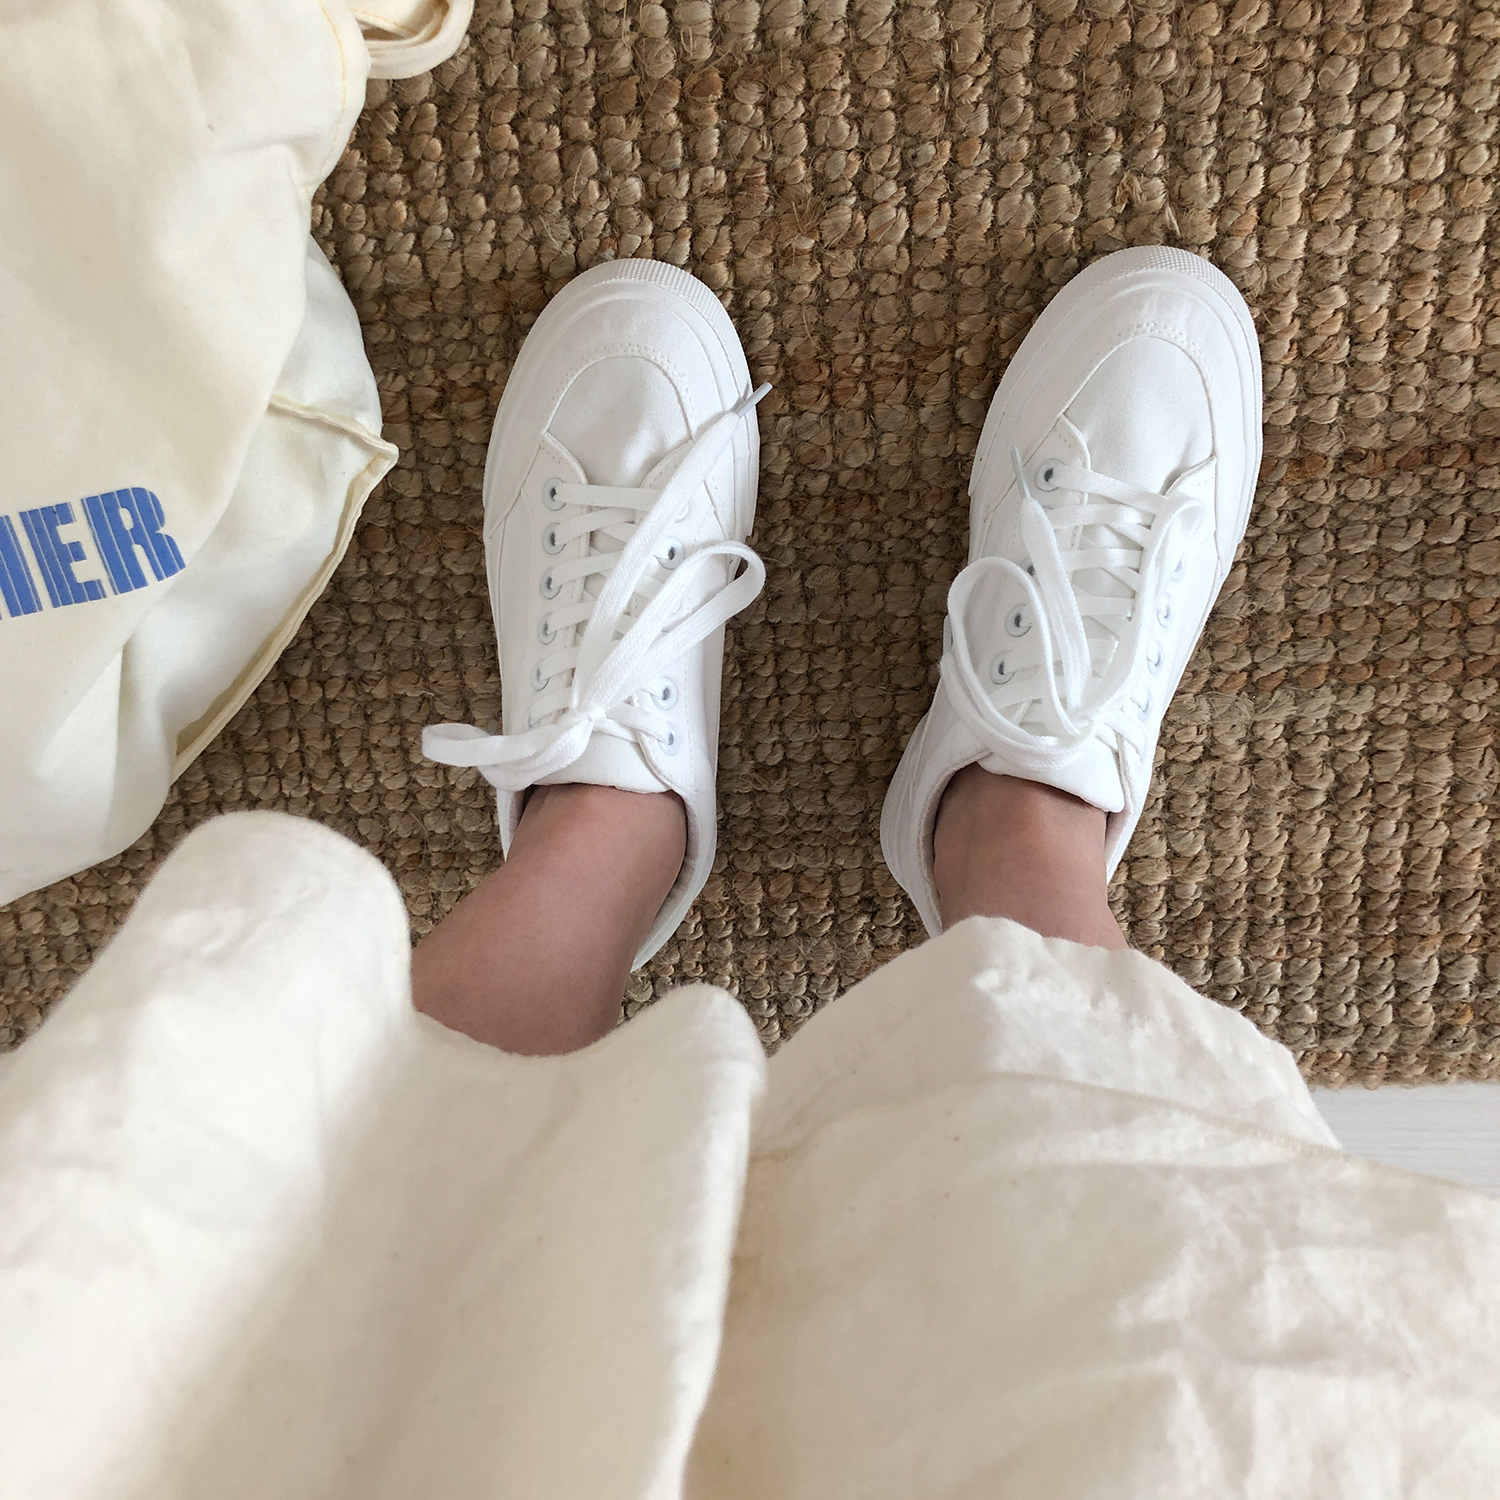 white canvas shoes womens